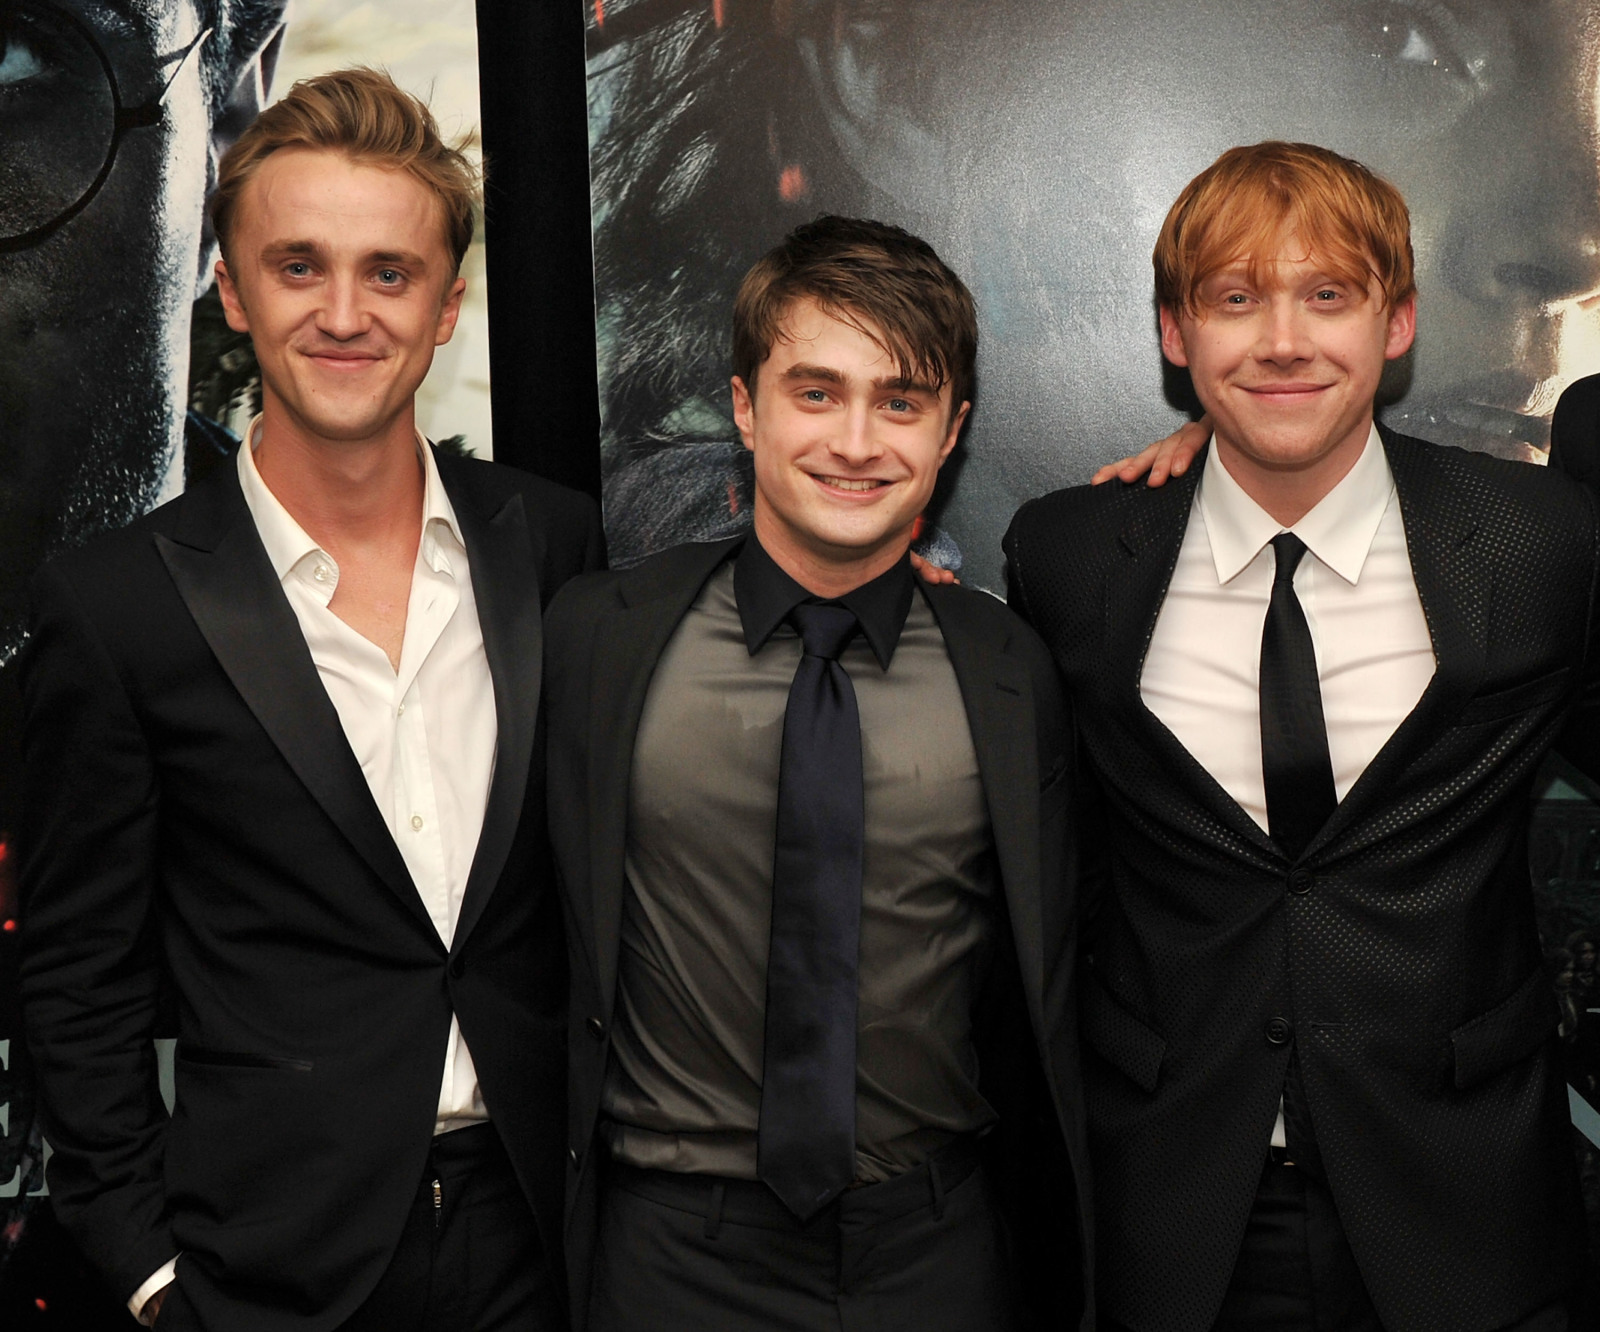 Harry Potter' Live-Action TV Series in Early Development at HBO Max